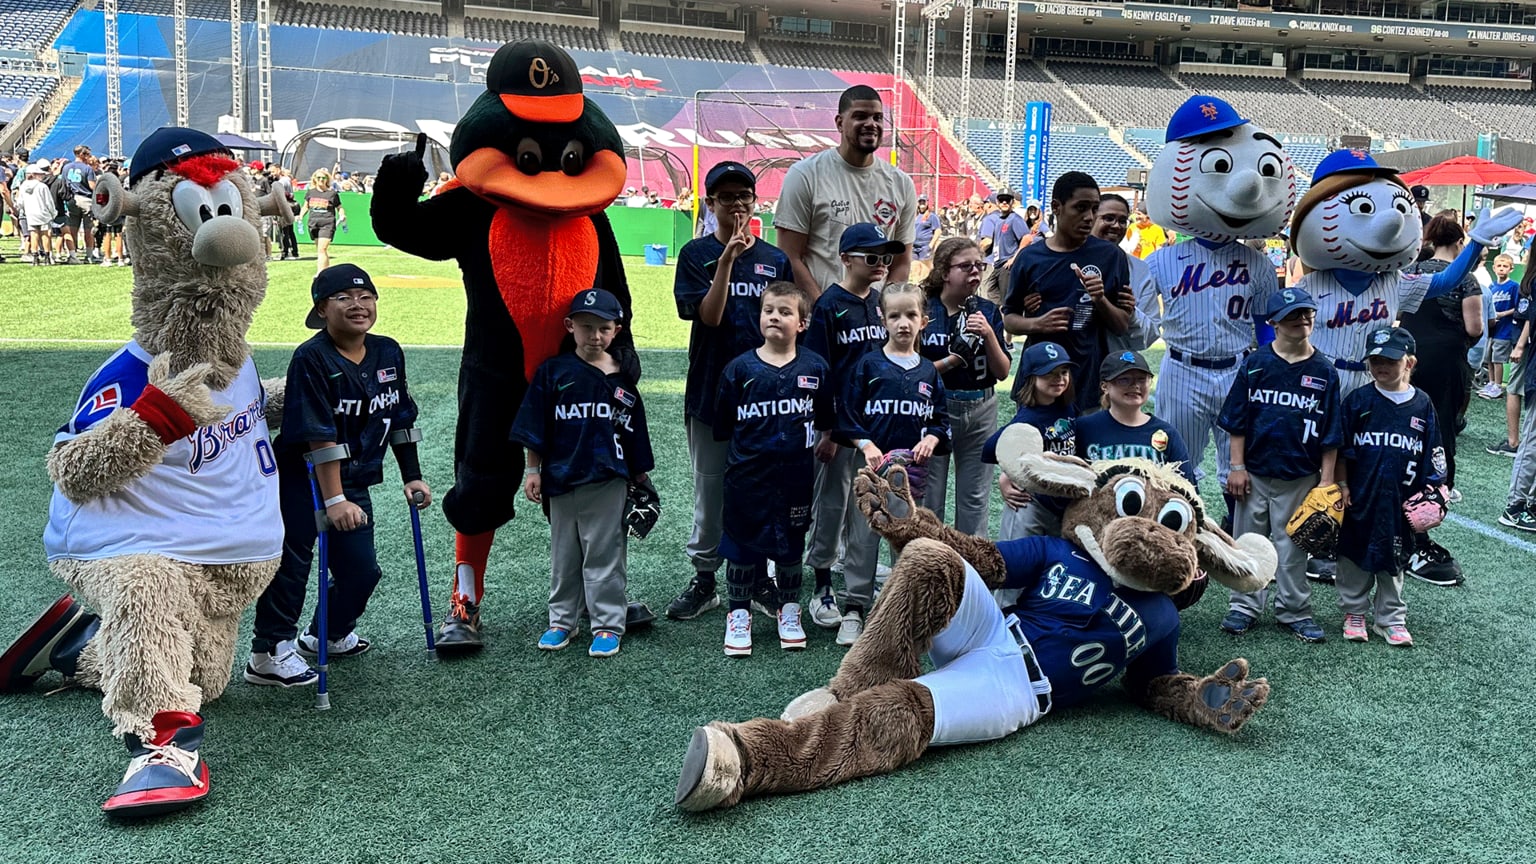 Mascots for the Braves, Orioles, Mariners and Mets pose for a group photo with young ballplayers